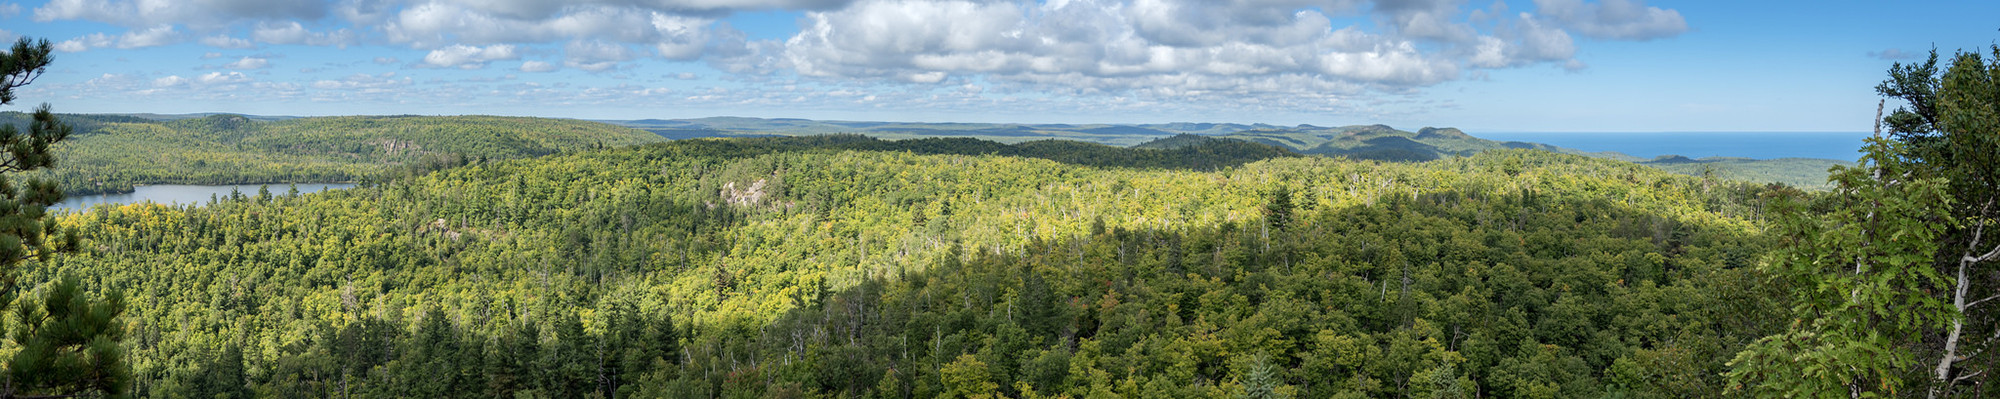 Superior National Forest Panorama - Photo Credit Zach Pierce